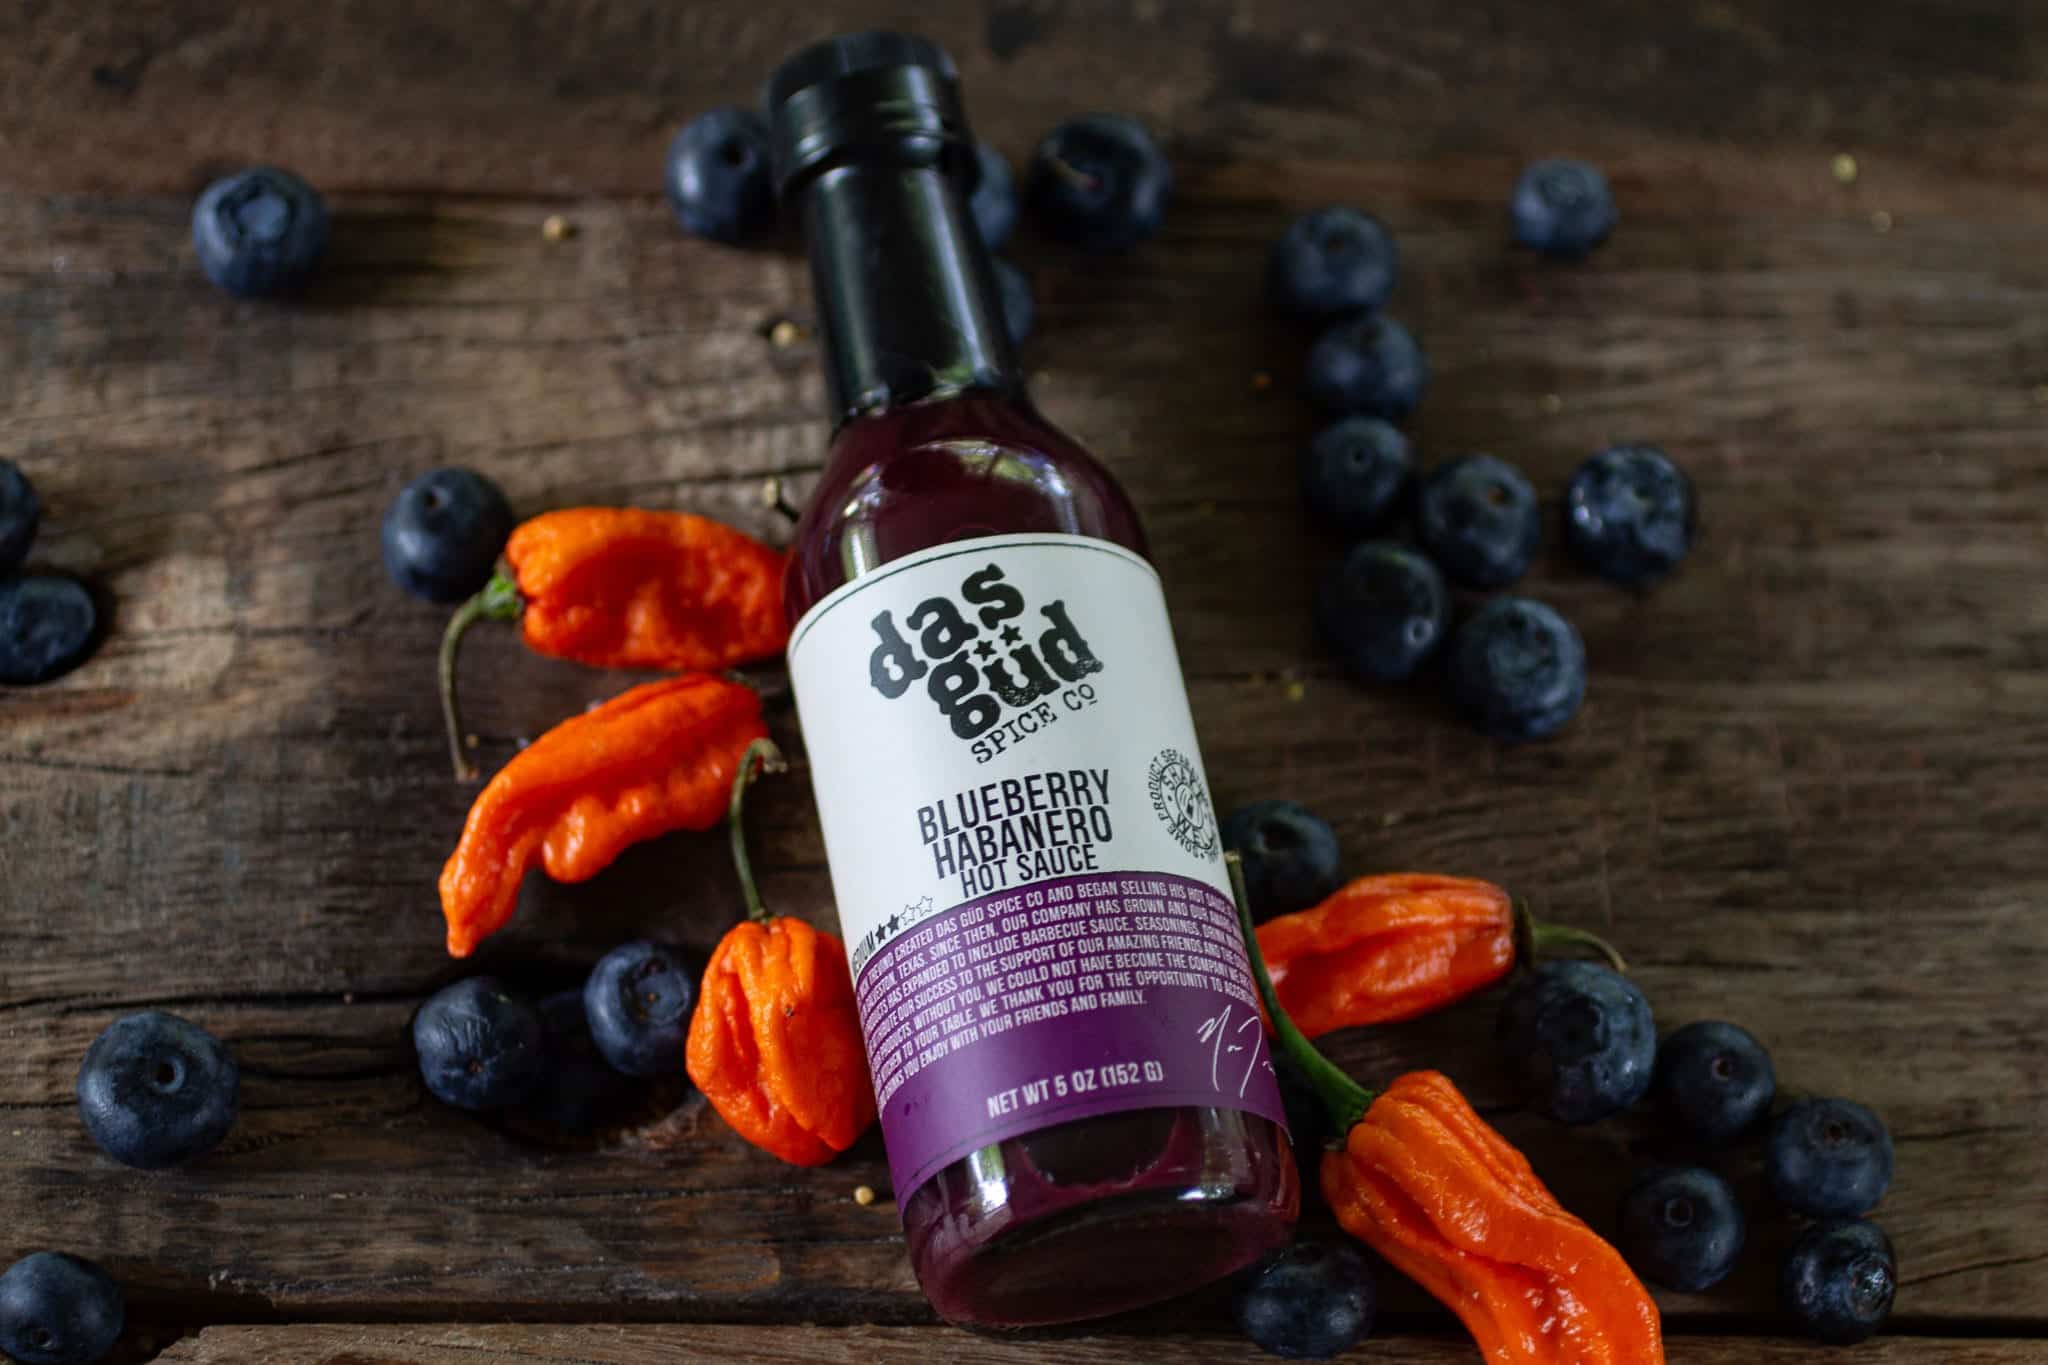 Custom-labeled bottle of Das Gut Hot Sauce, surrounded by fresh blueberries and habanero peppers on a wooden table.